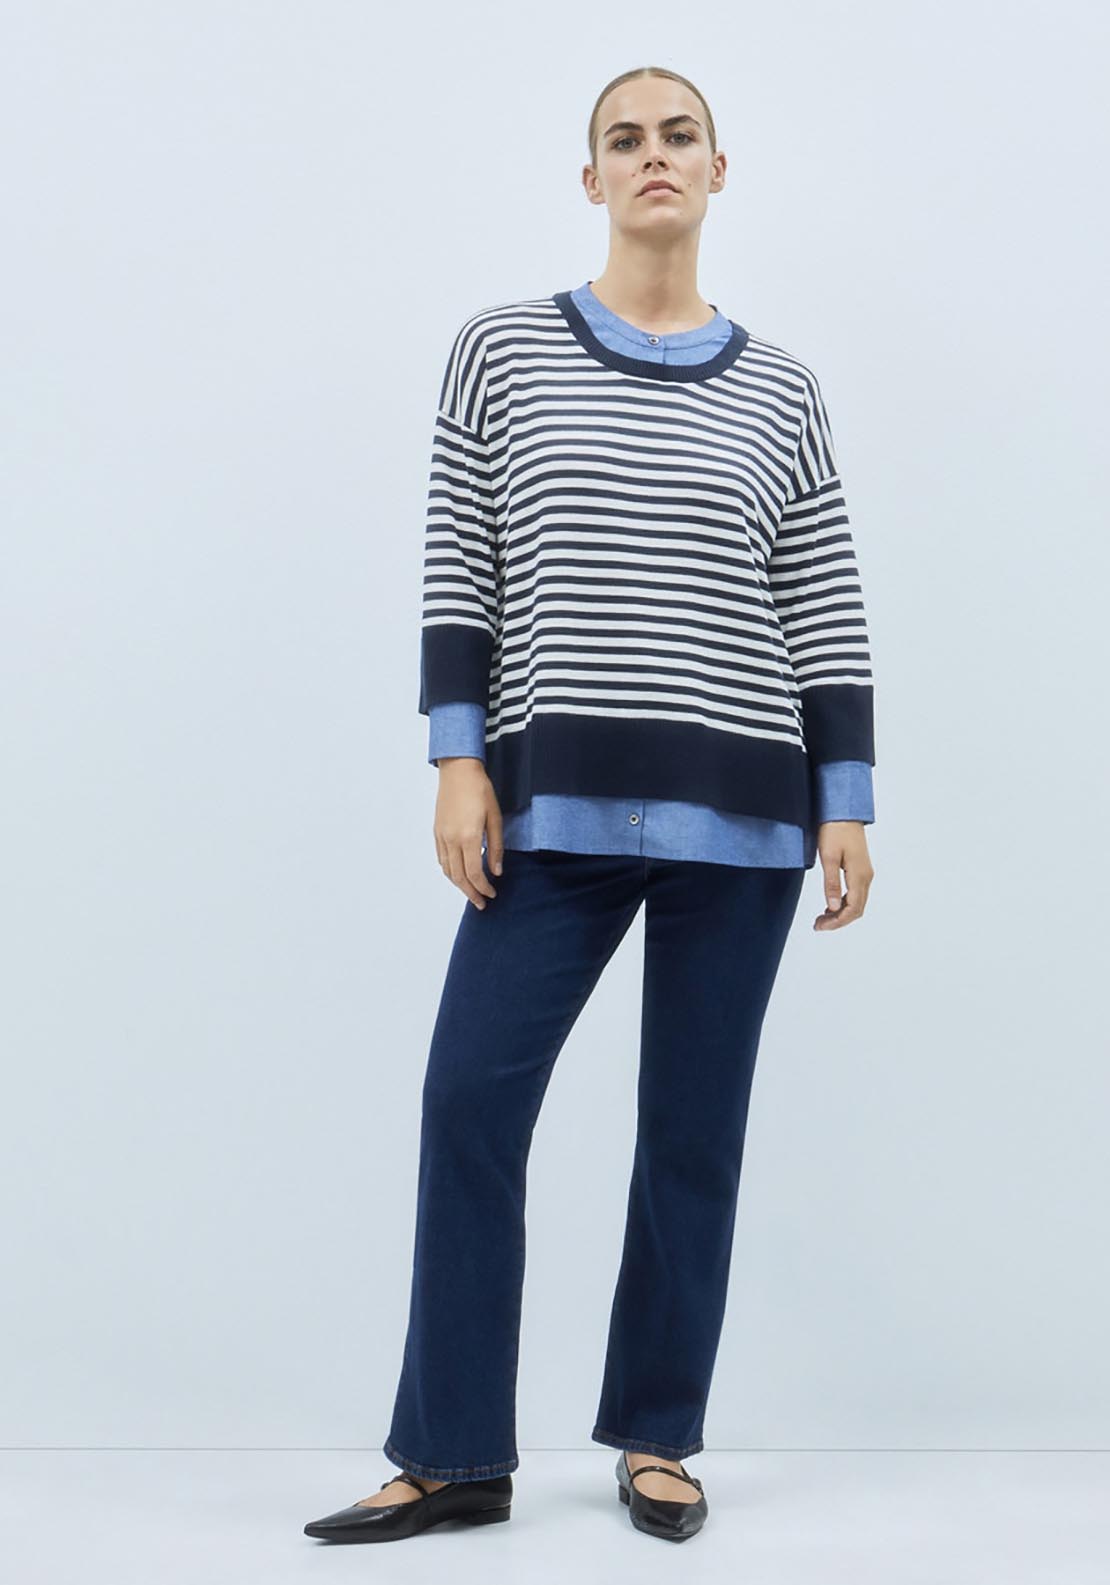 Couchel Striped Sweater 3 Shaws Department Stores